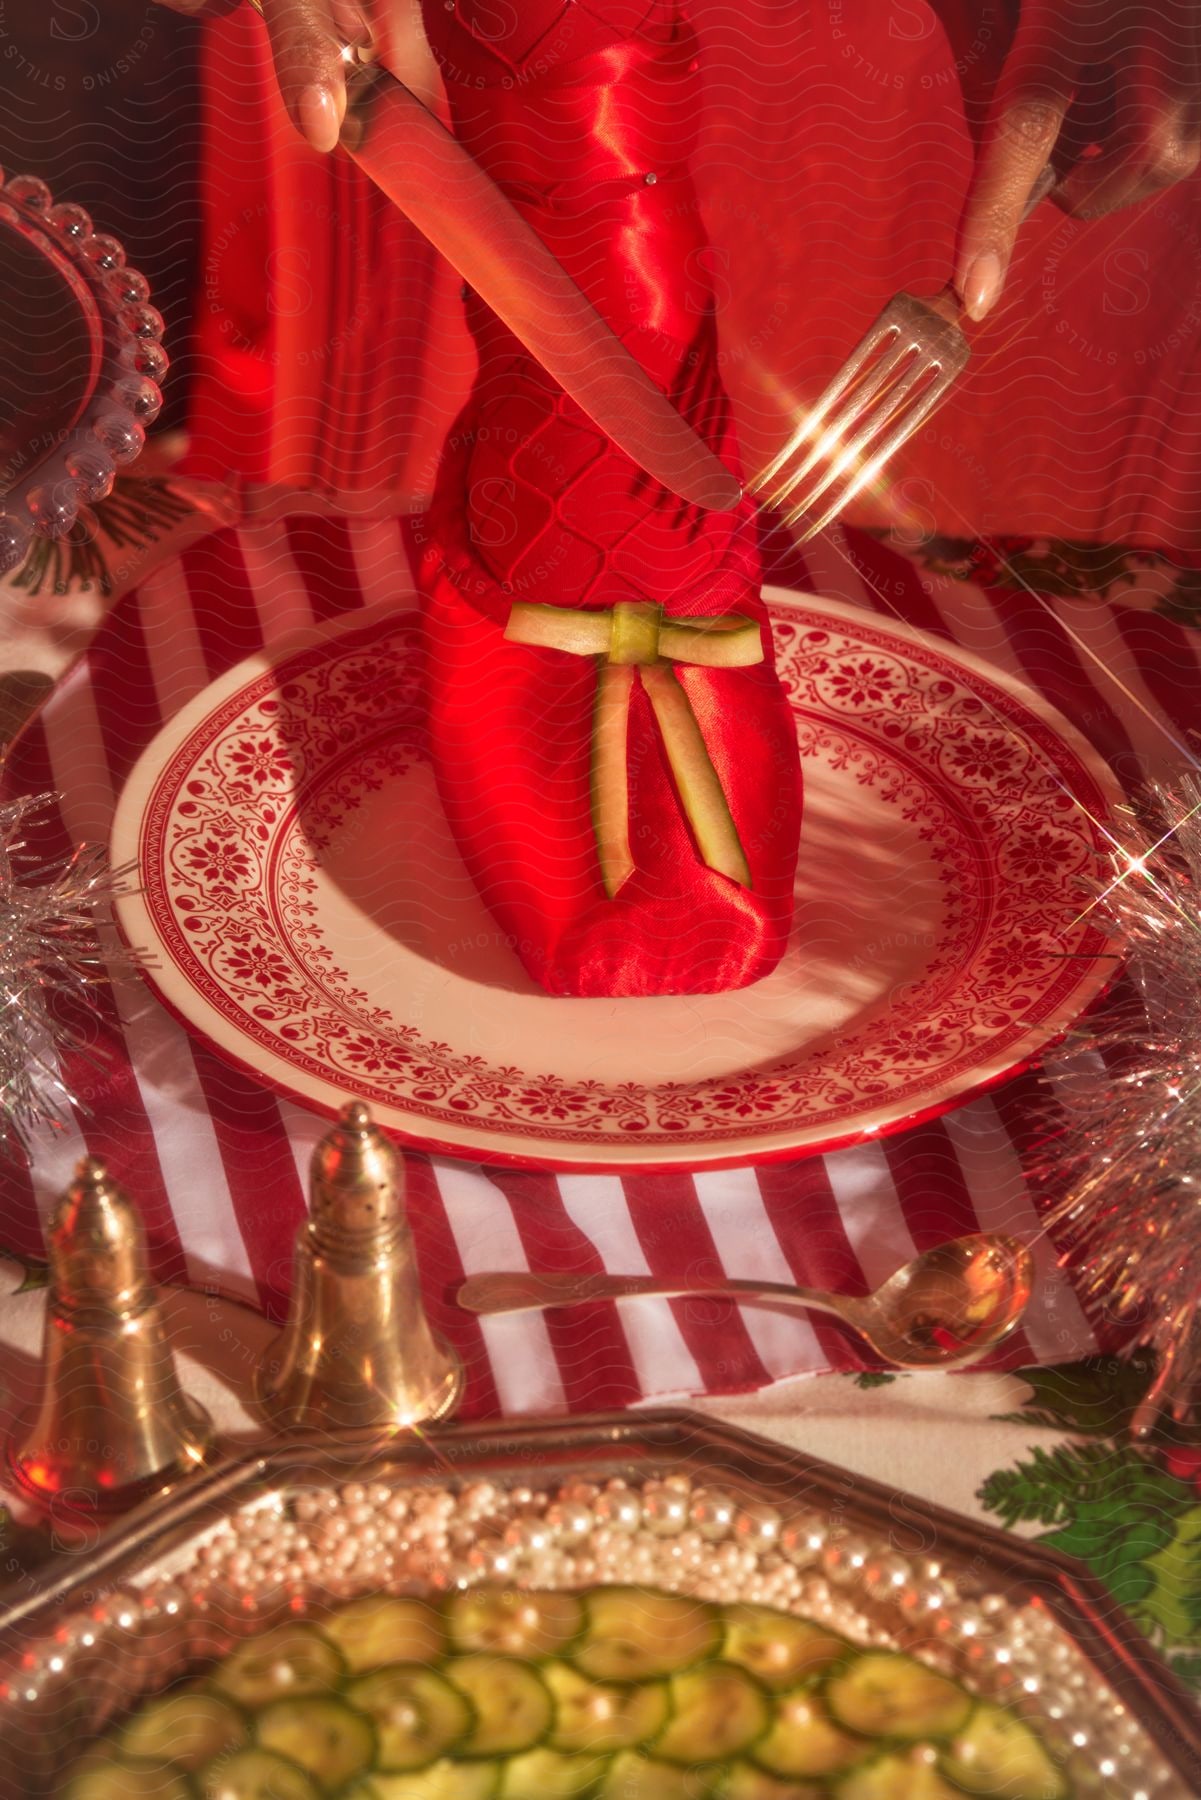 A whimsically decorated holiday table setting featuring a red napkin folded into a dress design on a plate.